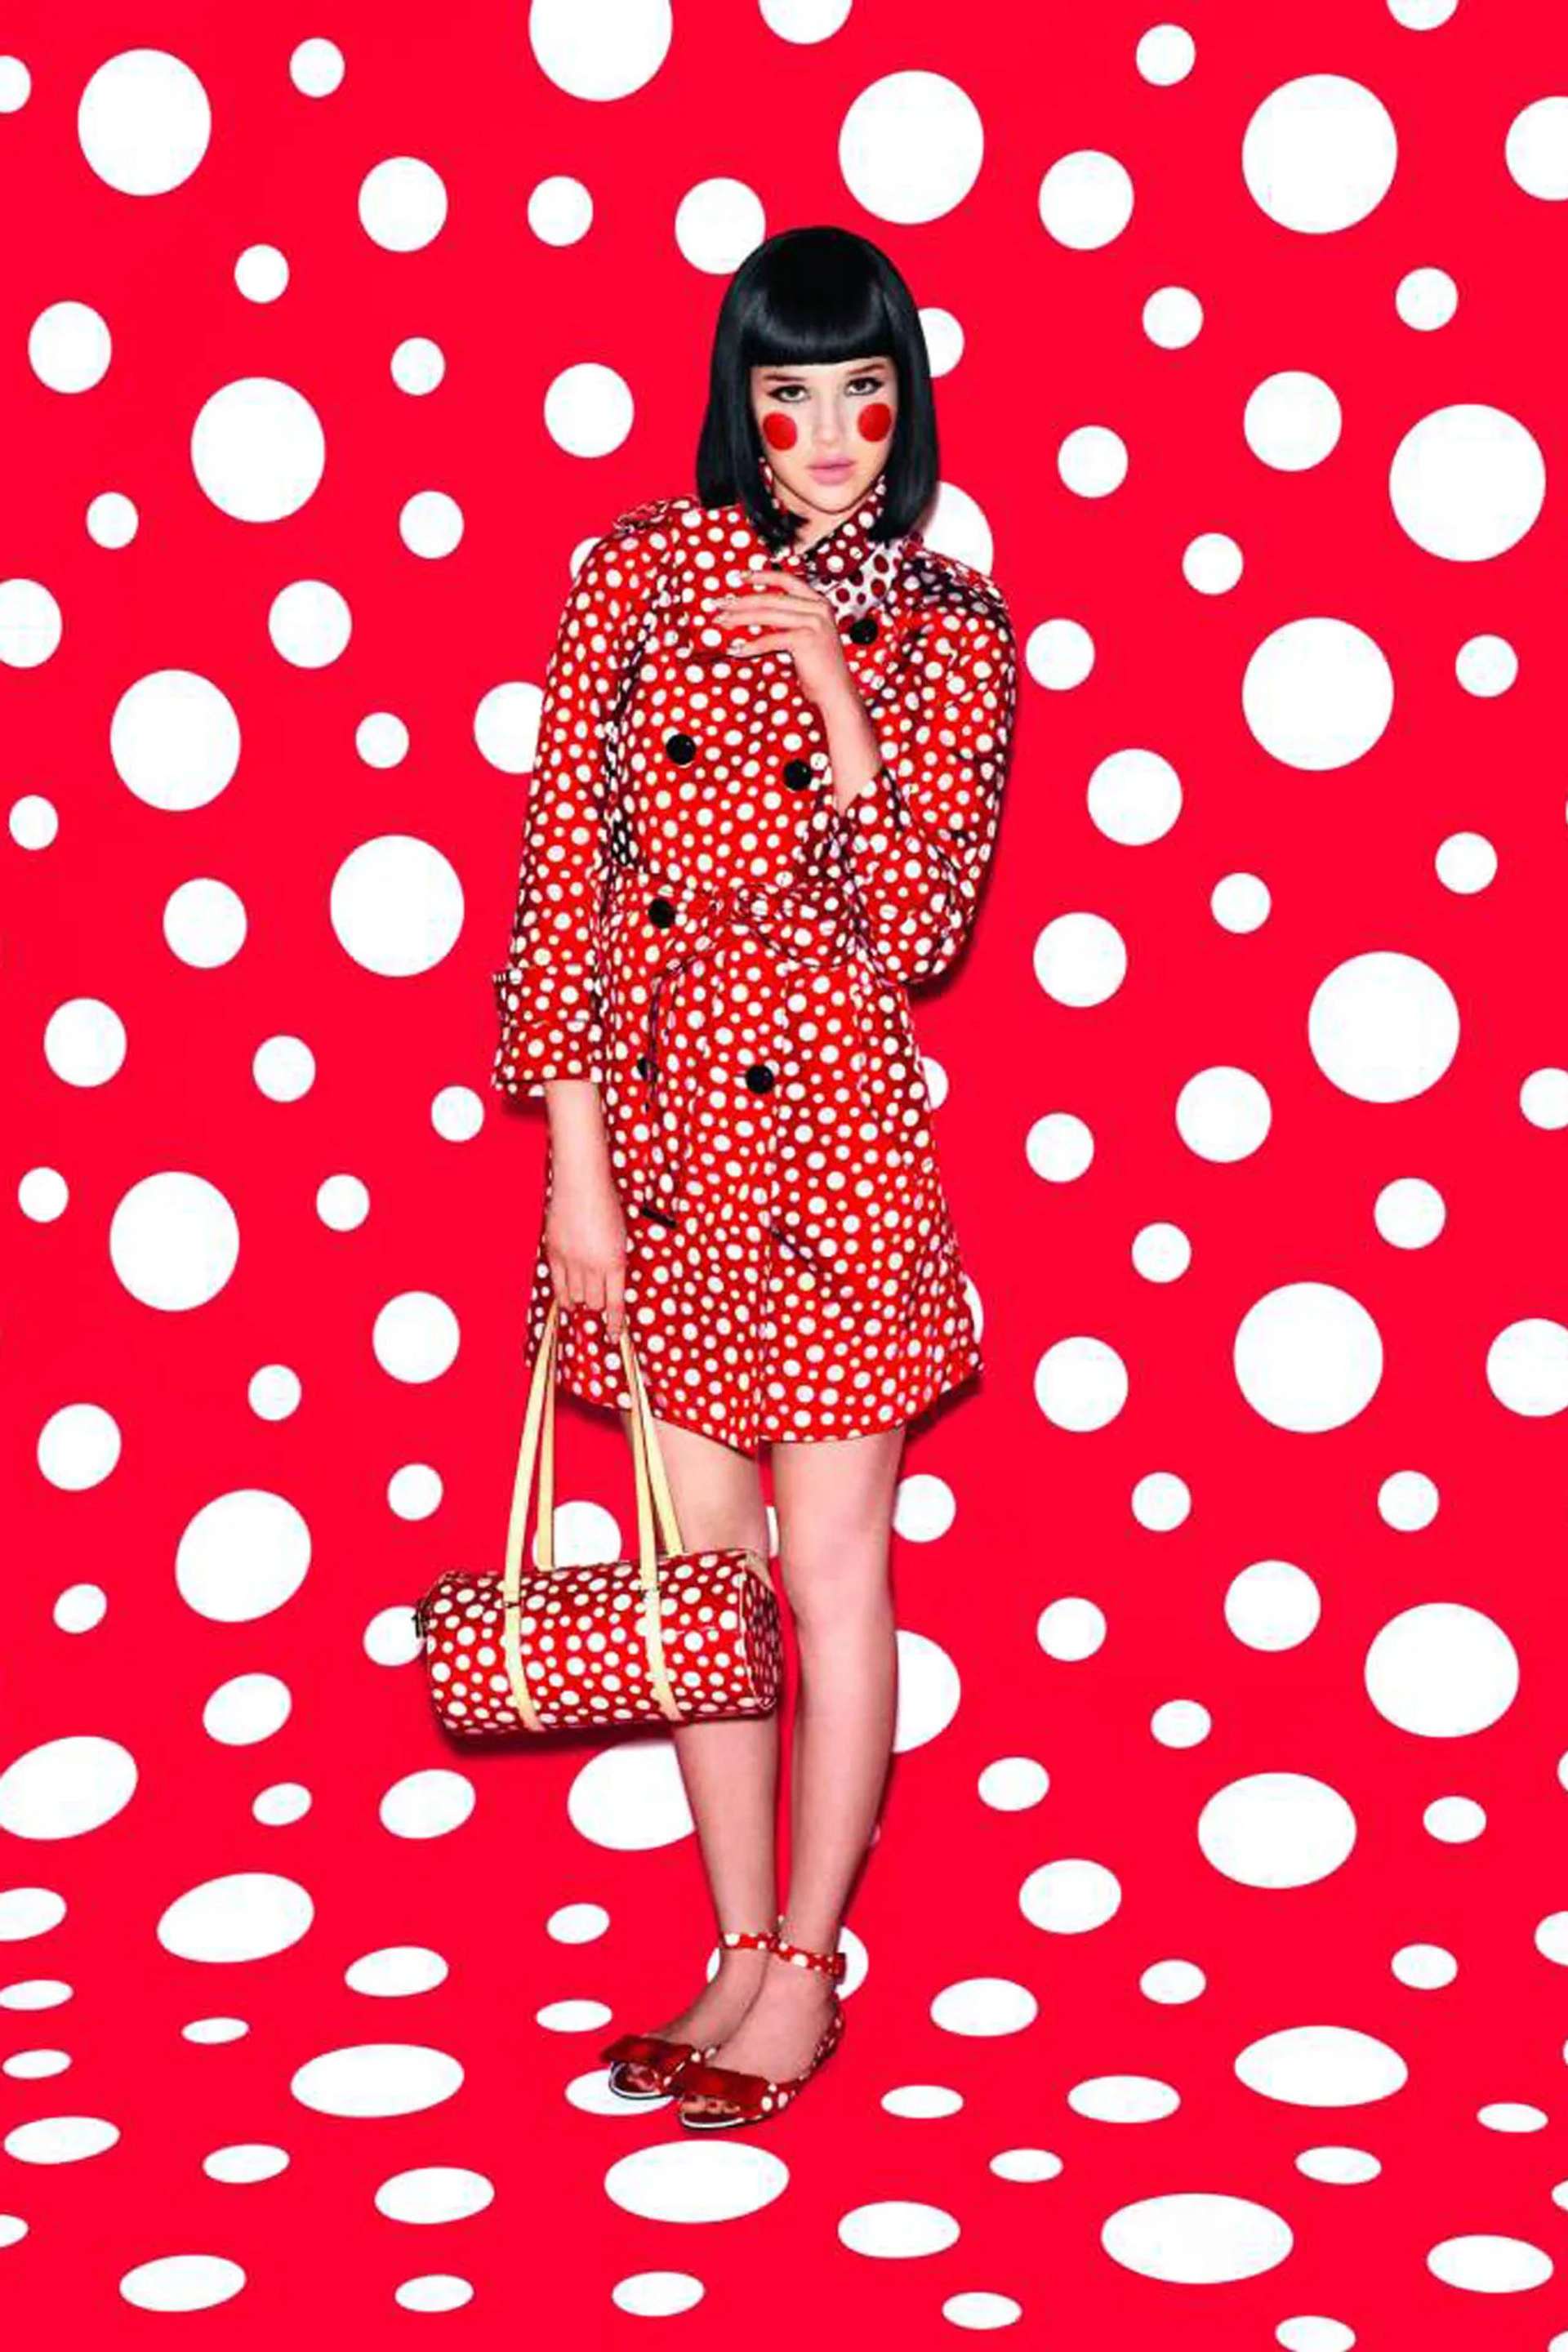 An image of a model dressed in white polka dots on a red background, holding a bag with the same pattern by Yayoi Kusama. She is standing against a background featuring the same print.